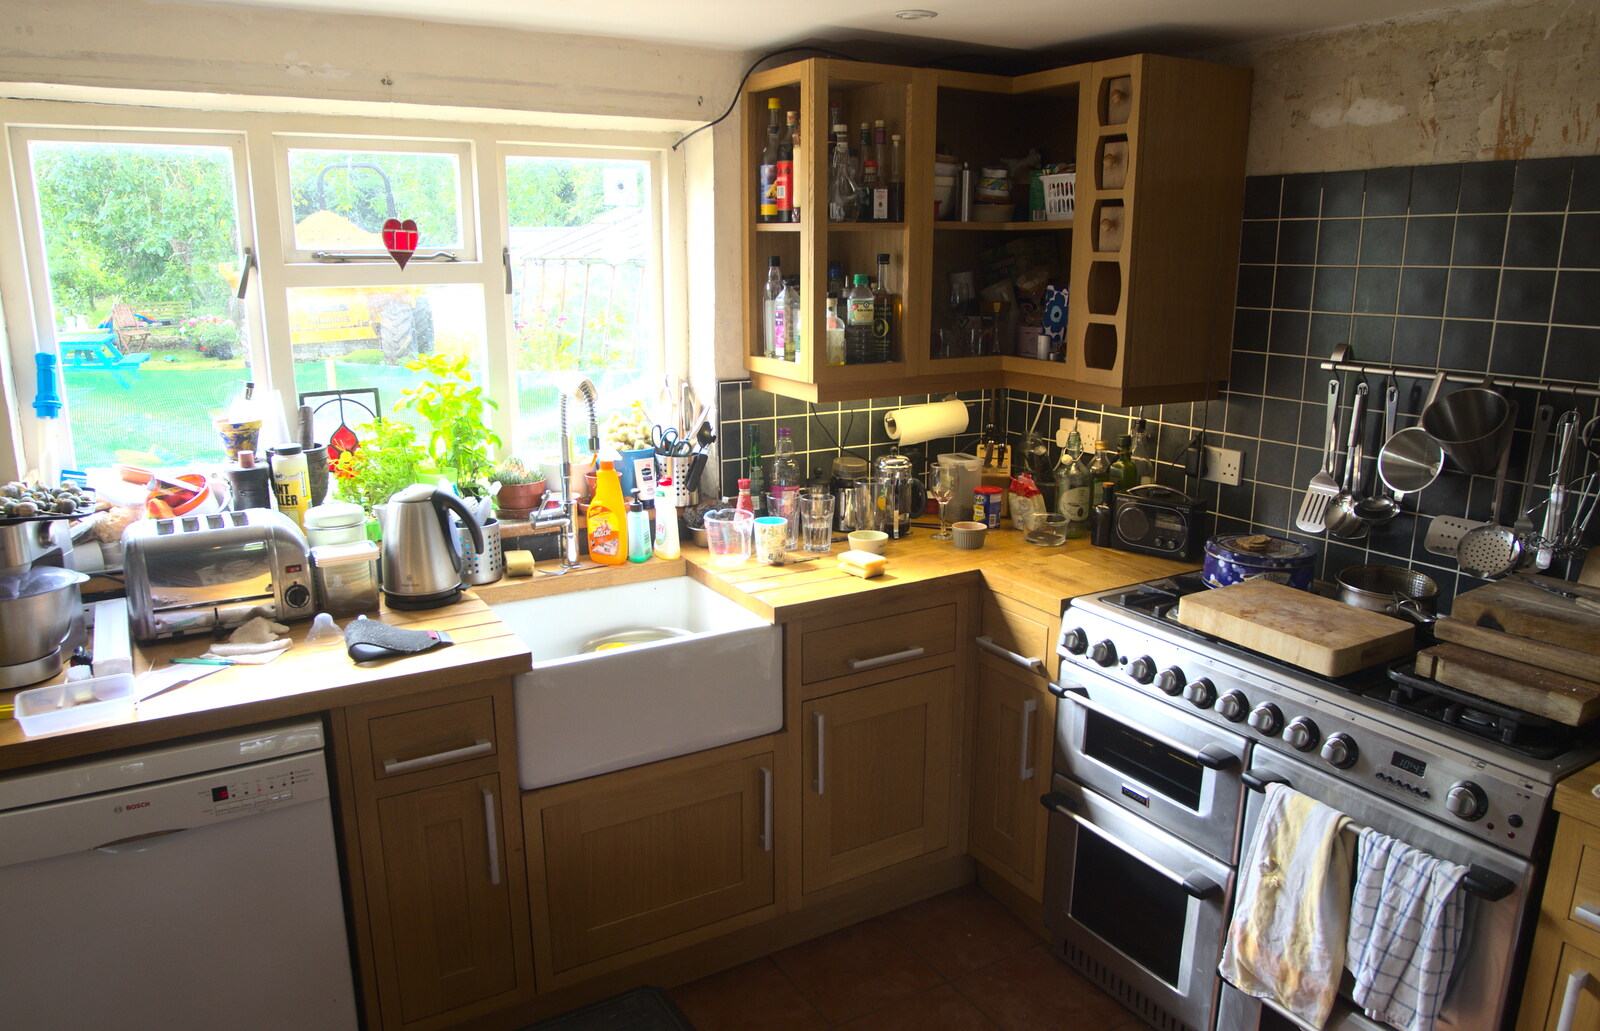 A view of the kitchen from Grand Designs: Building Commences, Brome, Suffolk - 8th August 2013